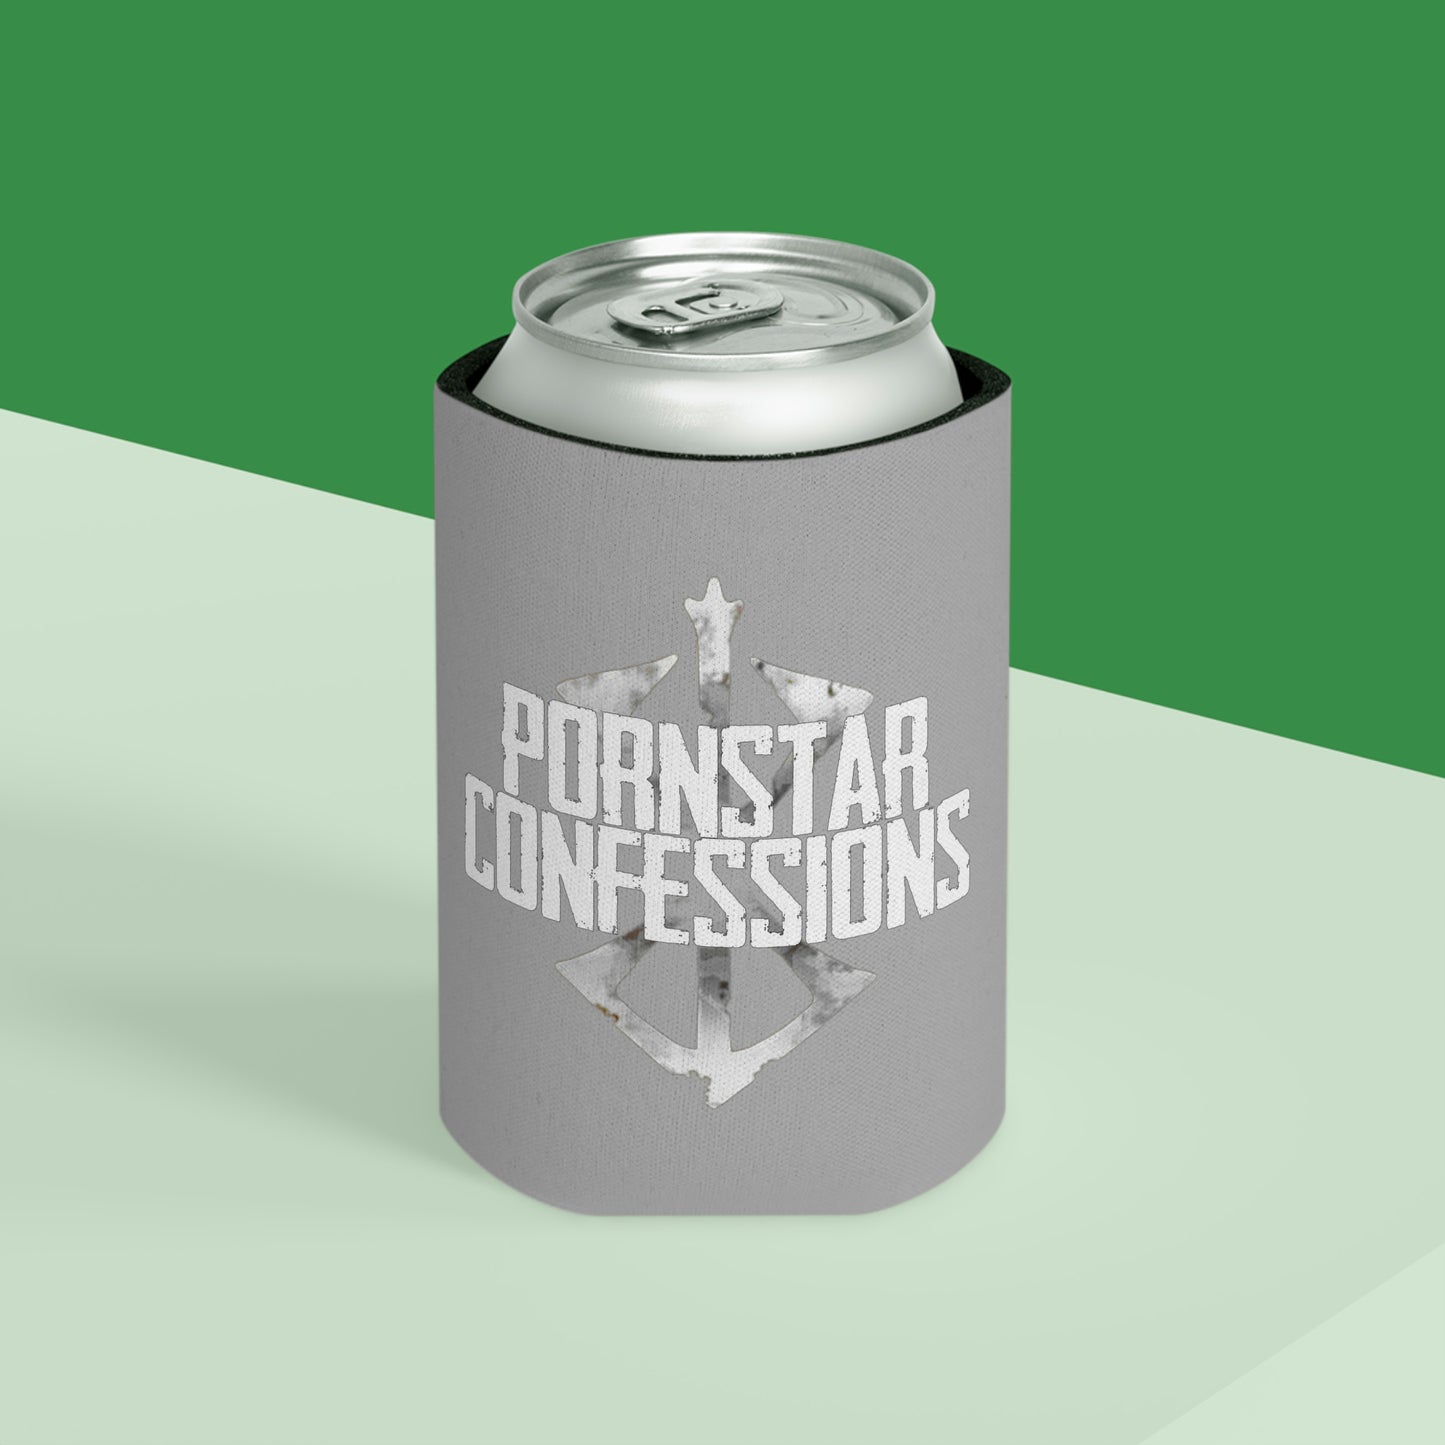 Porn Star Confessions - Can Cooler